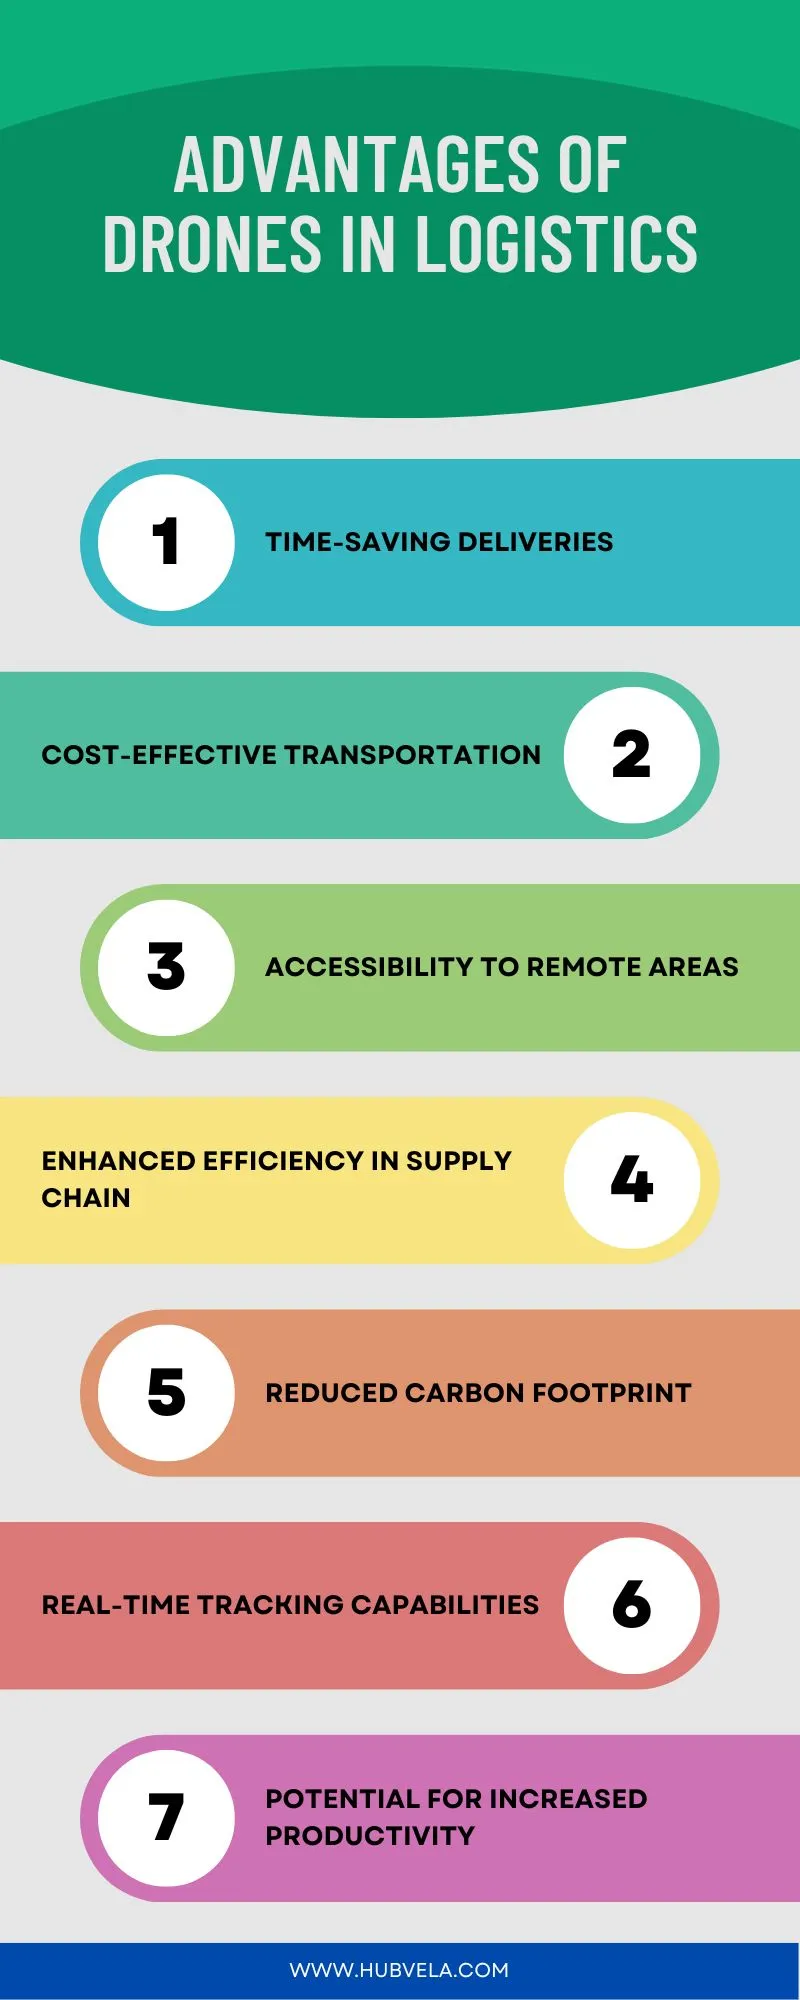 Advantages of Drones in Logistics Infographic